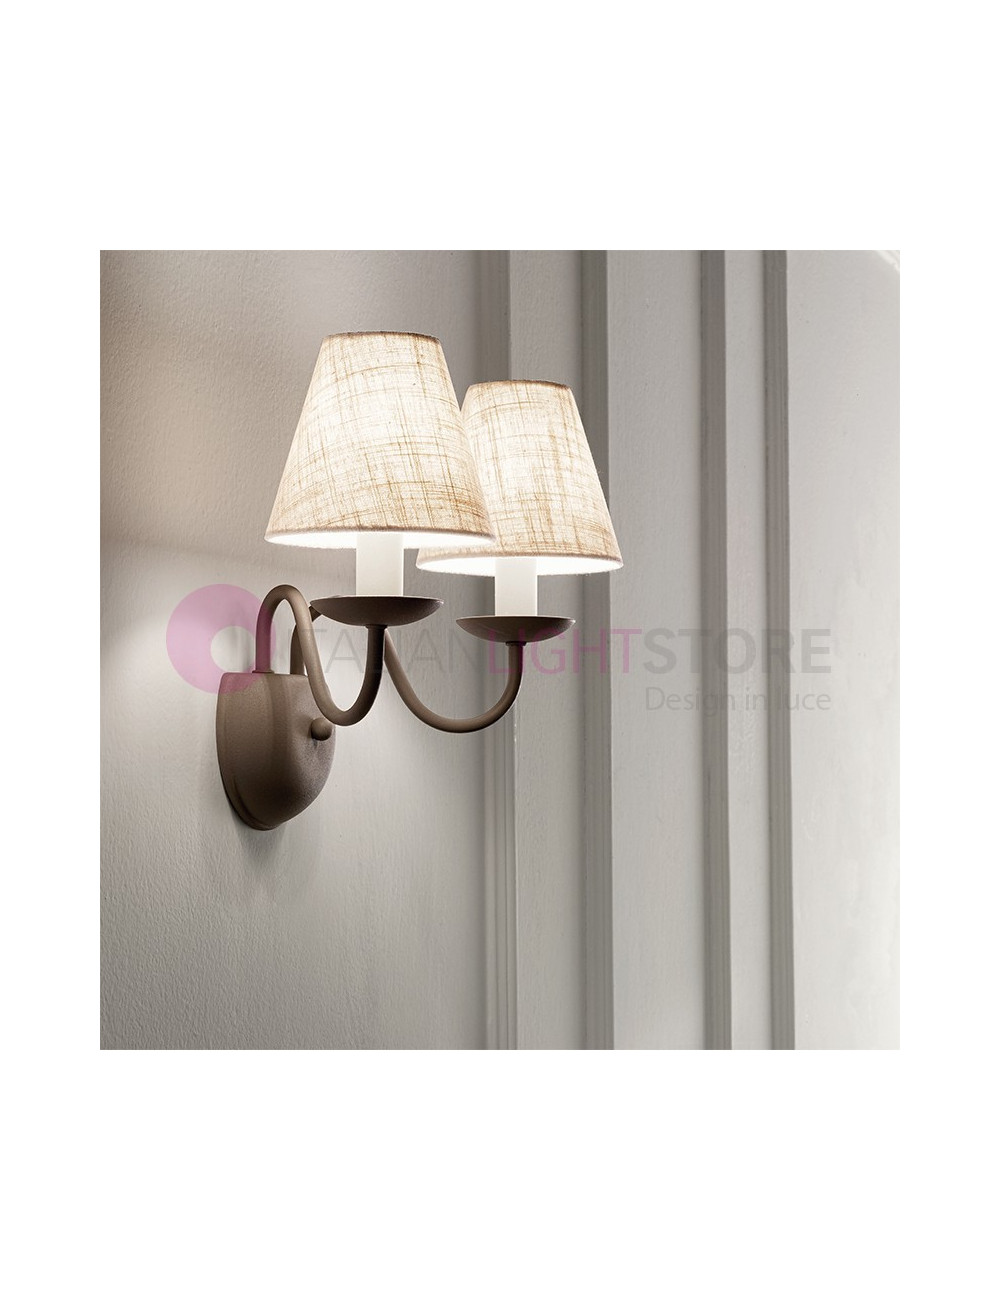 CHARME GREY Classic Wall Light 2 lights Flemish Style Rustic Country 6266TO PERENZ